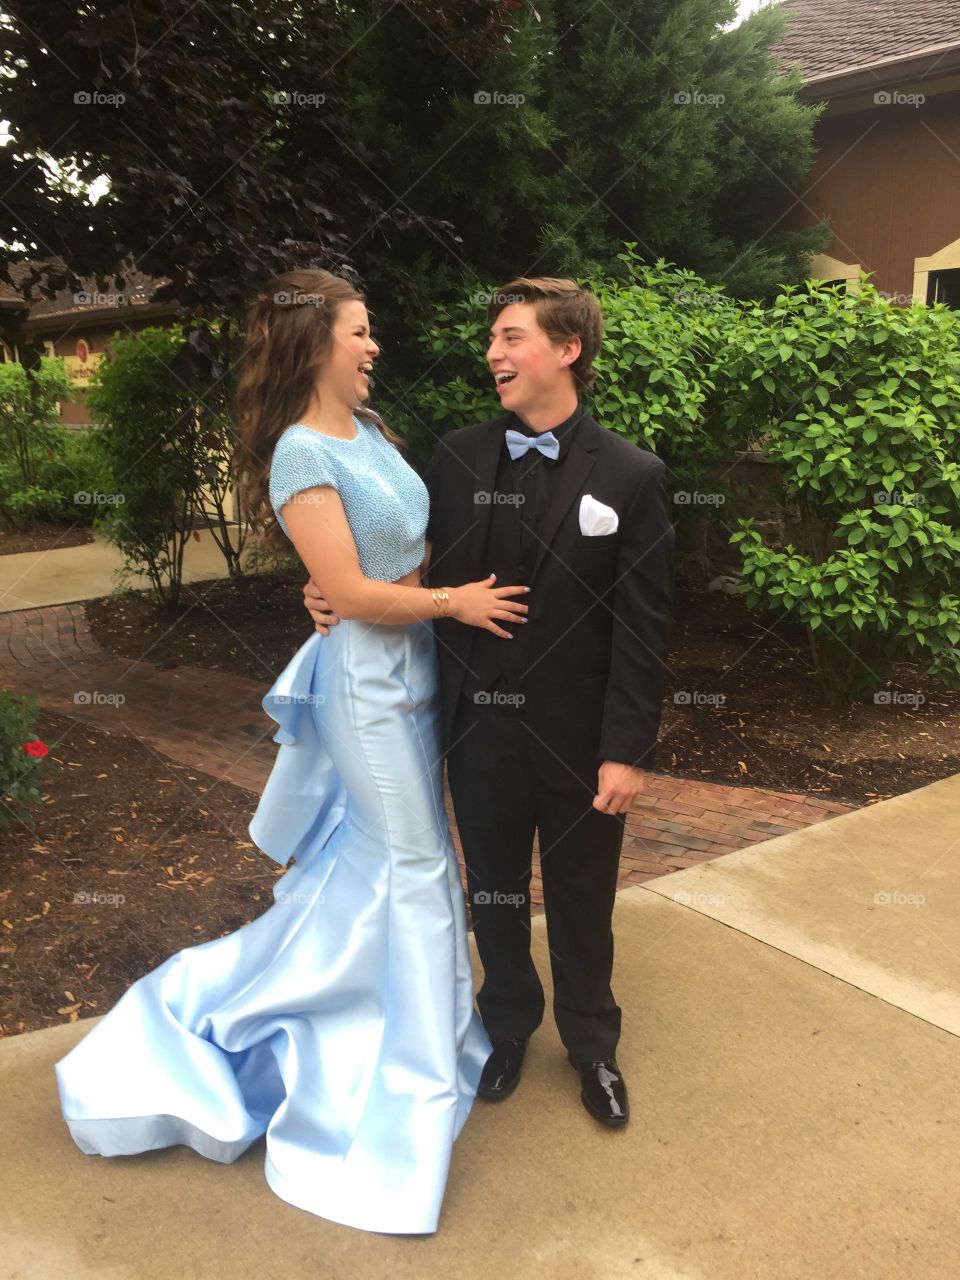 Prom happiness